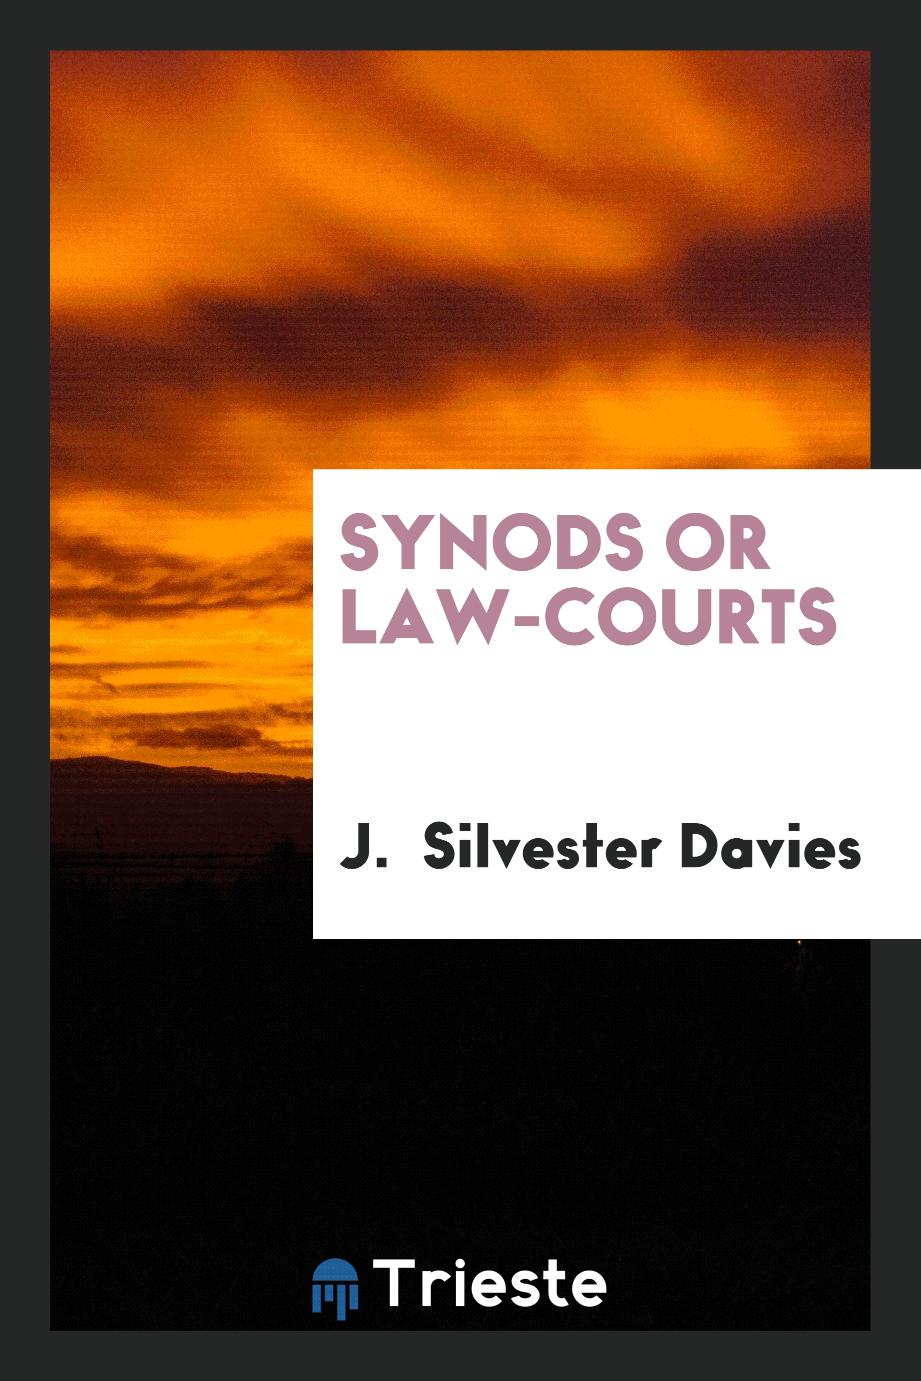 Synods or law-courts